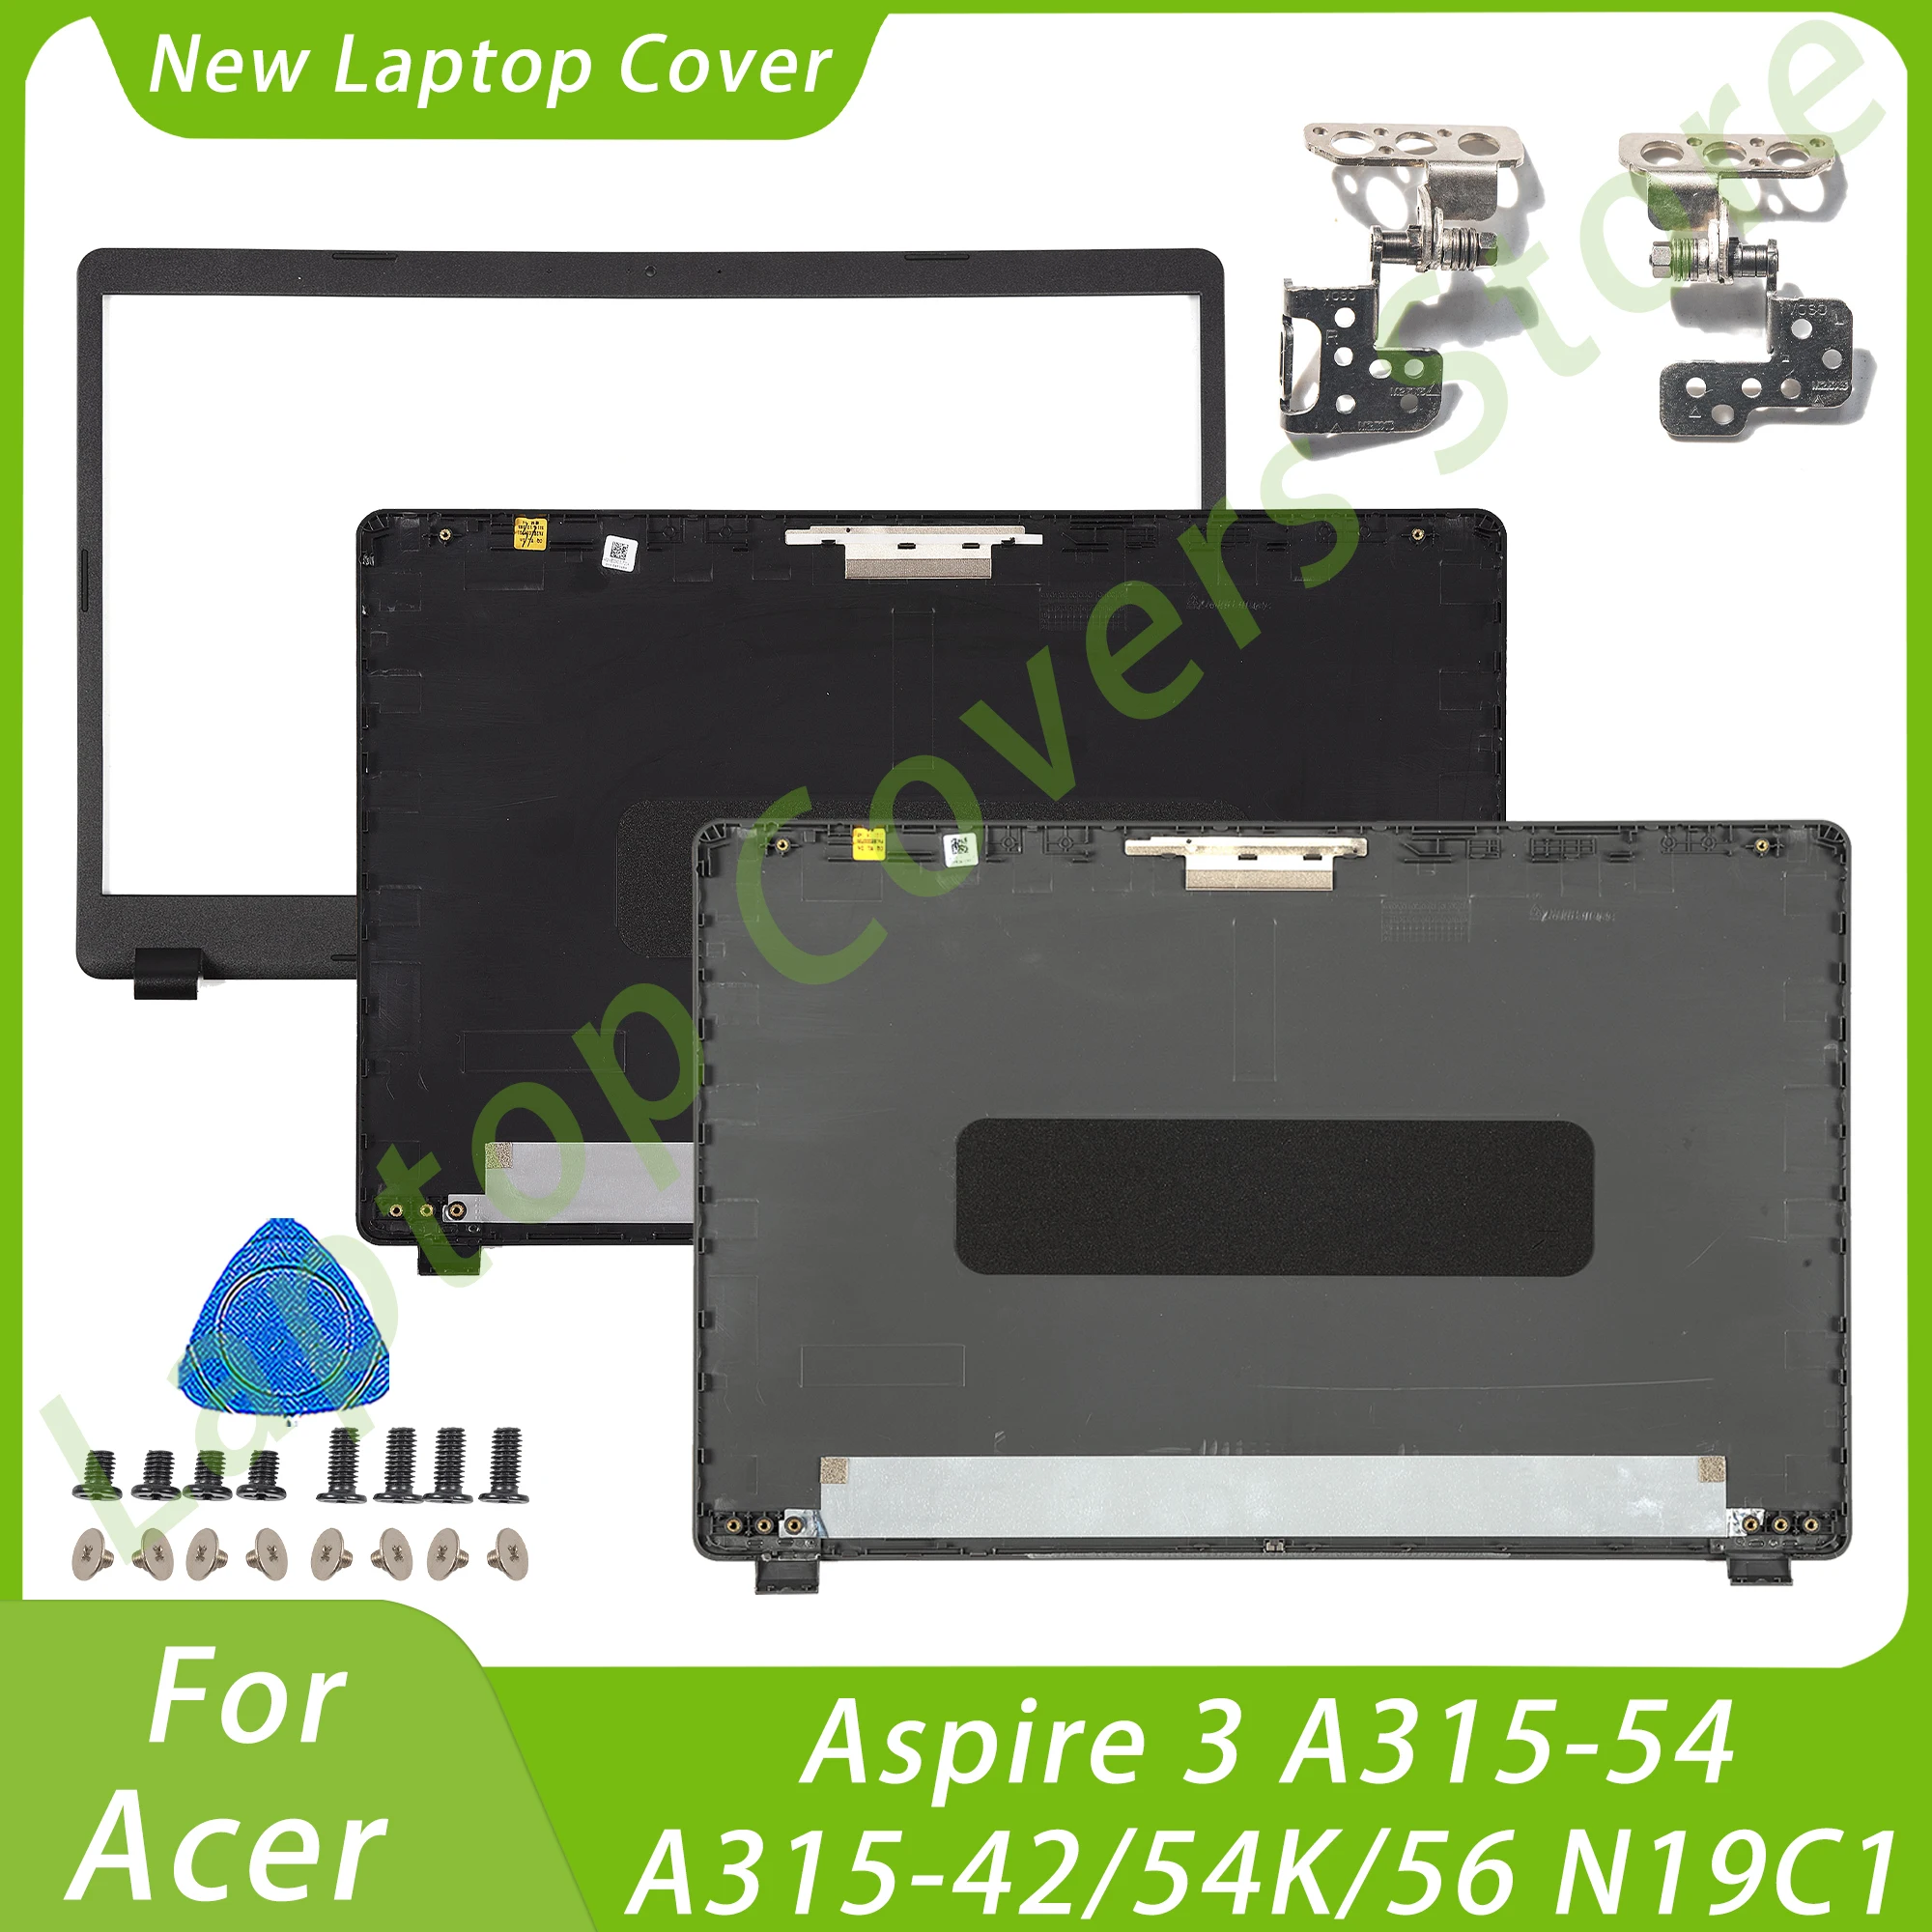 

LCD Back Cover For Acer Aspire 3 A315-54 A315-42/54K/56 N19C1 EX215-51/52 Top Case Bezel Hinges Laptop Parts Replace Black/Gray